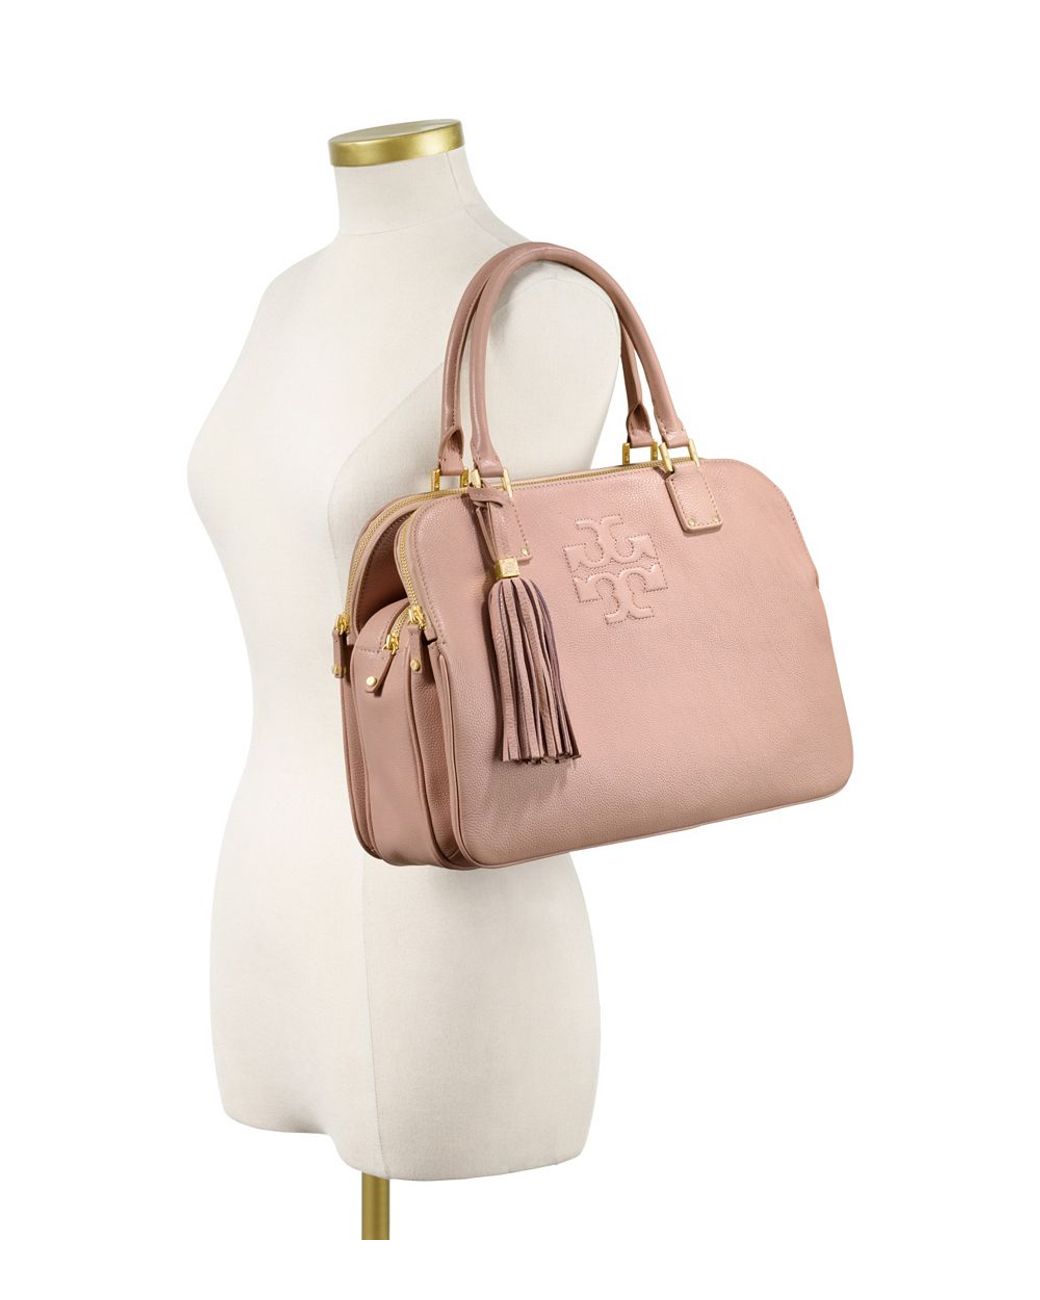 Tory Burch Thea Triple Zip Compartment Satchel in Pink